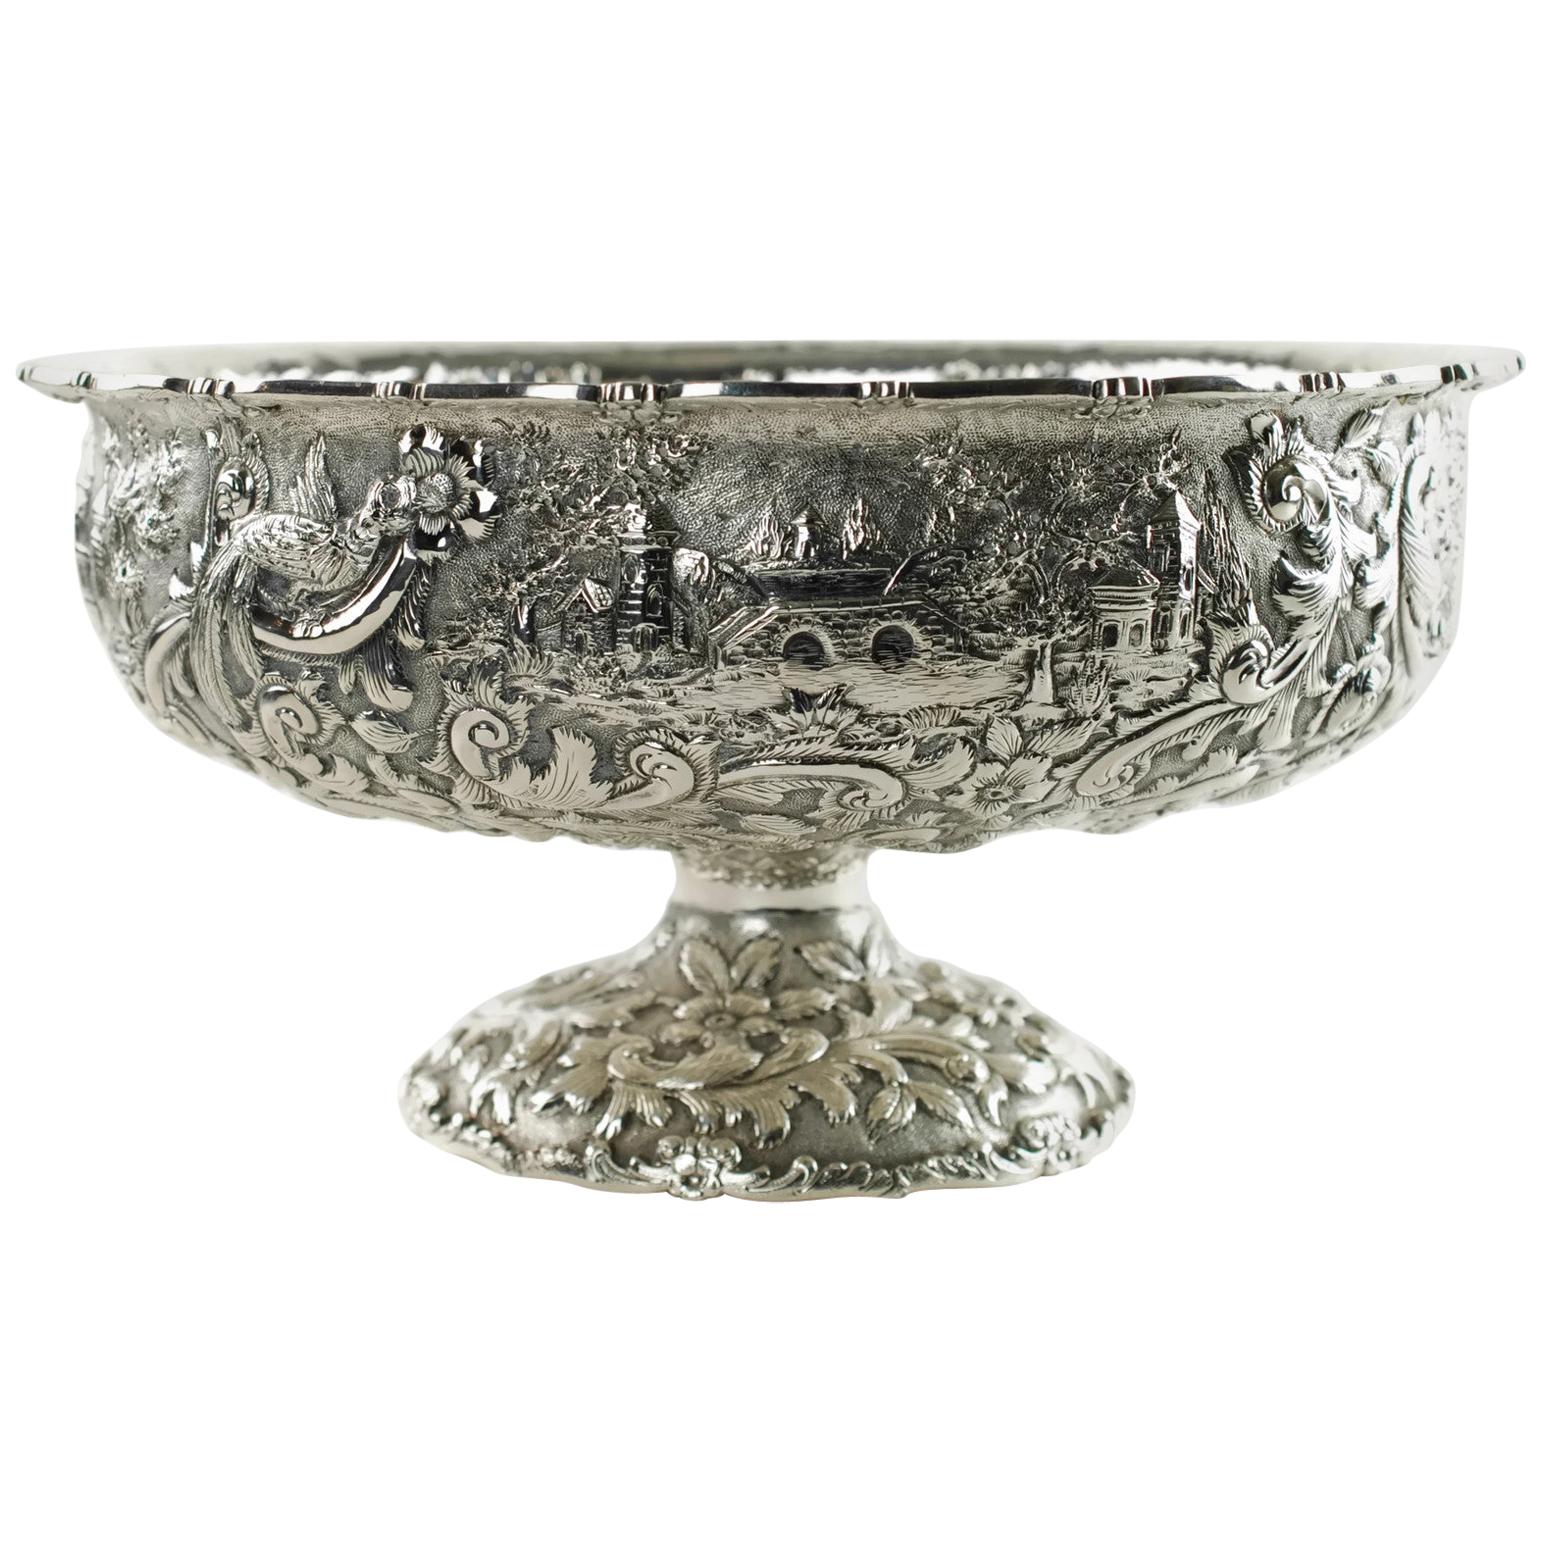 This large ornate early 20th century sterling silver centerpiece bowl has been made in the Castle pattern and is marked for The Loring Andrews Company of Cincinnati. The footed bowl features highly detailed all-over repoussé decoration which